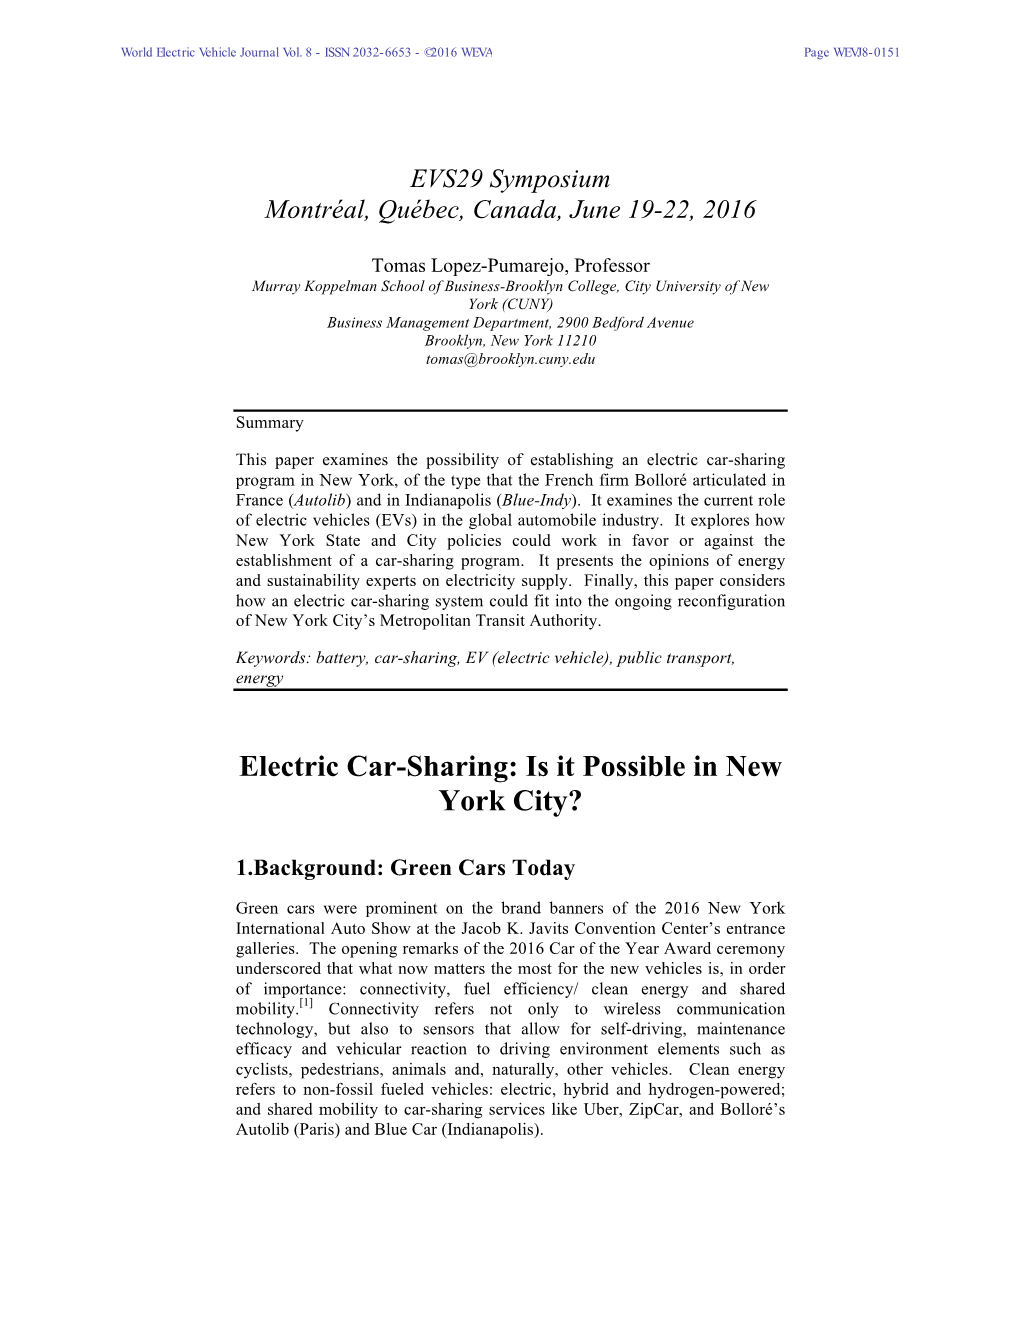 Electric Car-Sharing Program in New York, of the Type That the French Firm Bolloré Articulated in France (Autolib) and in Indianapolis (Blue-Indy)